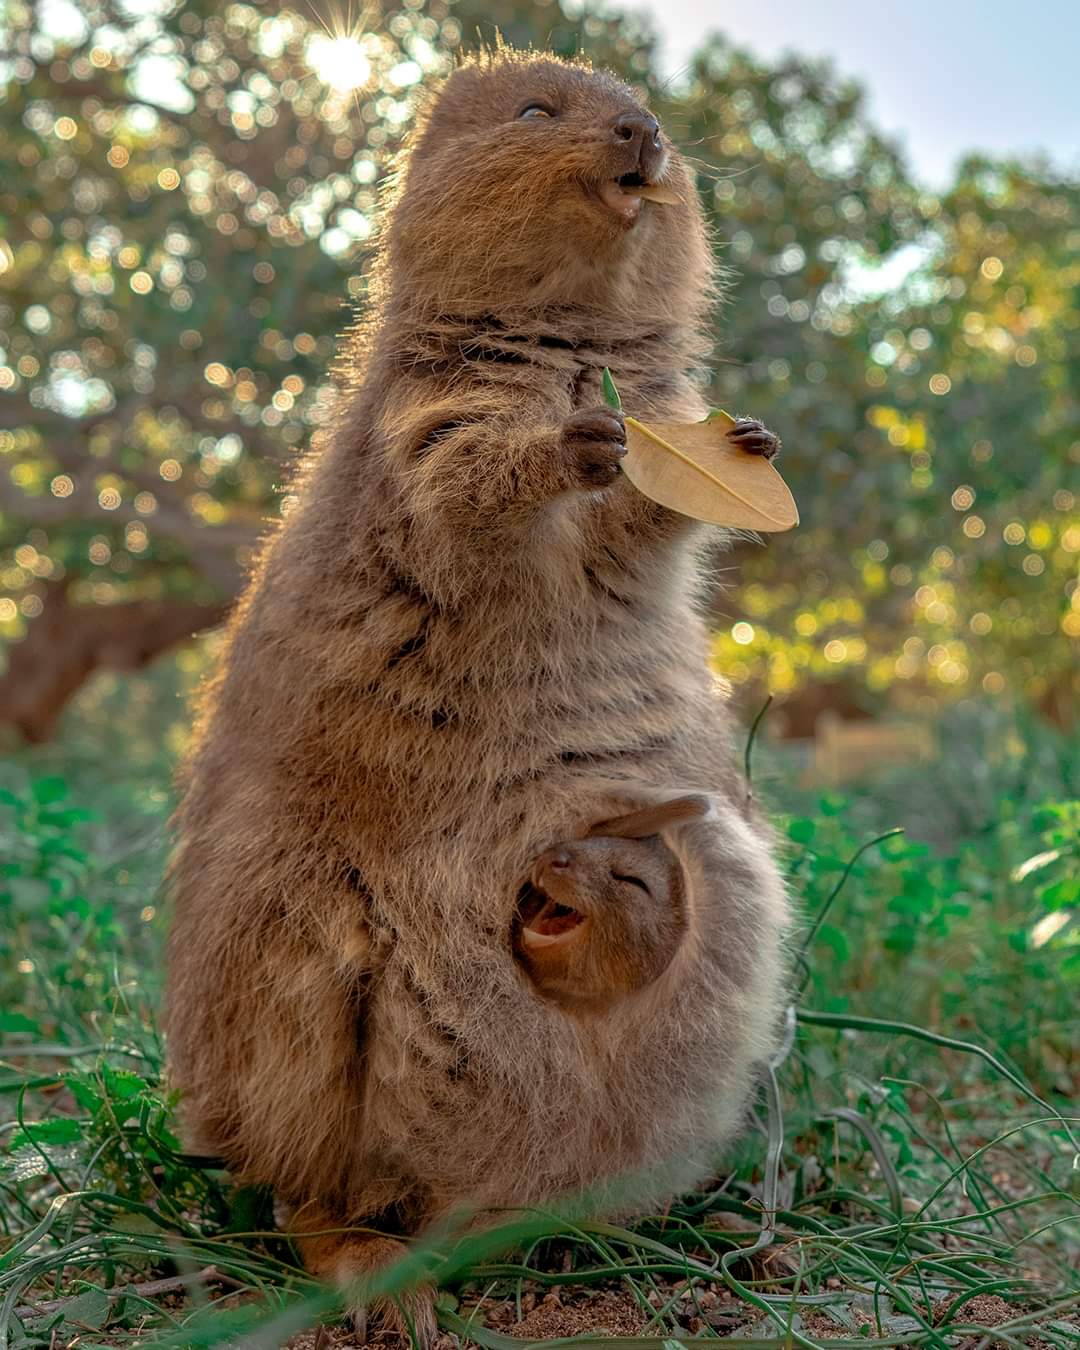 Smiling quokka with joey in pouch